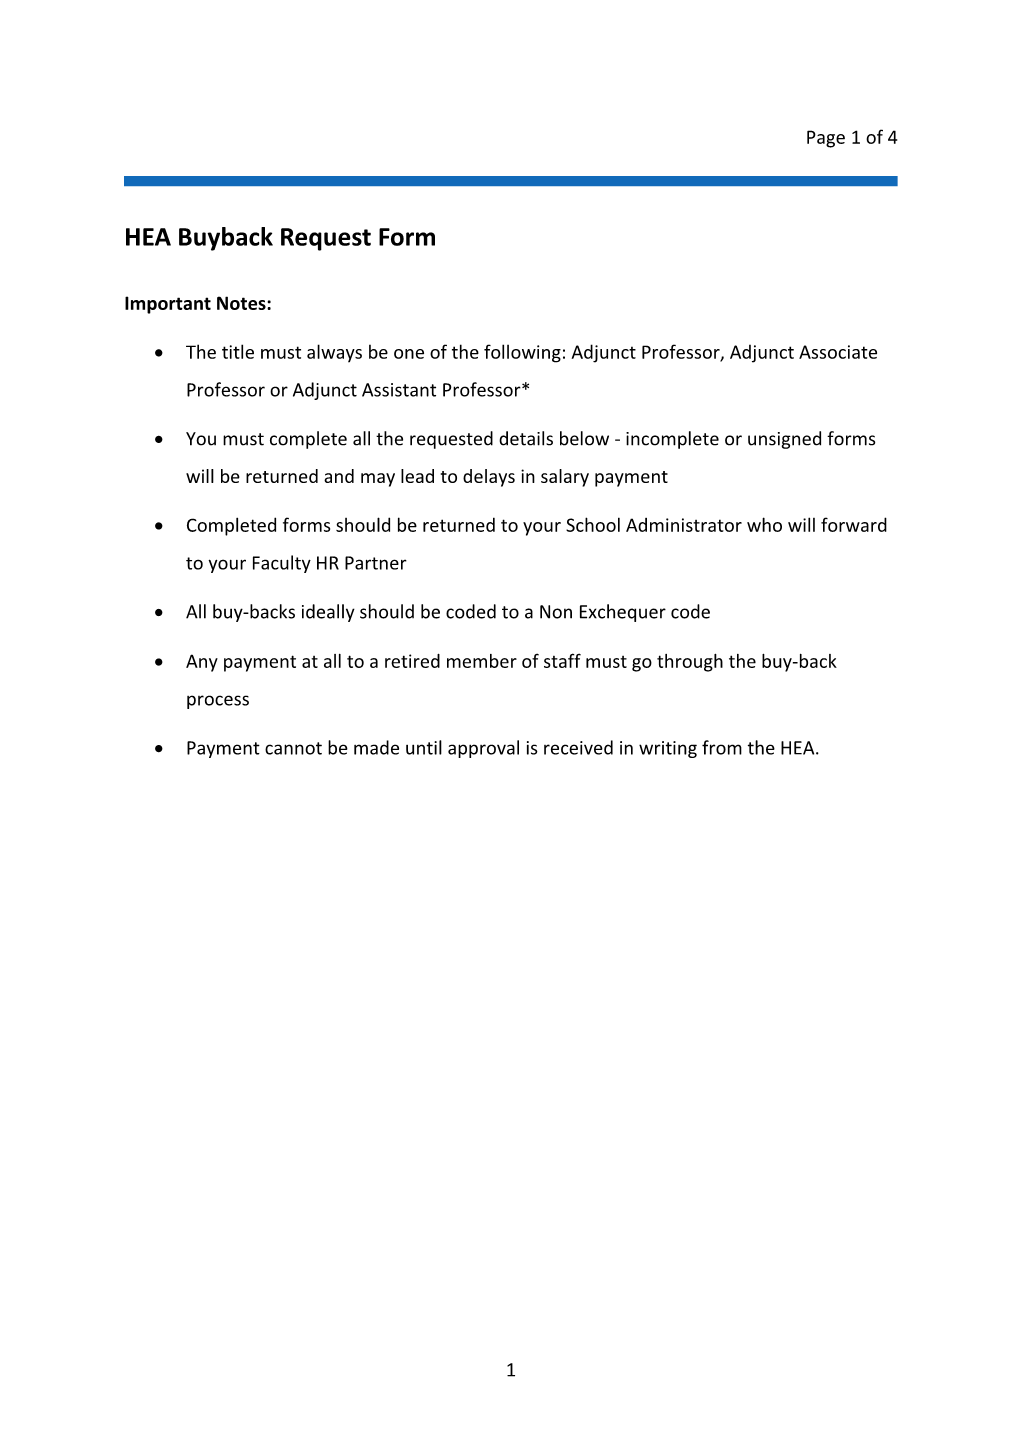 HEA Buyback Request Form